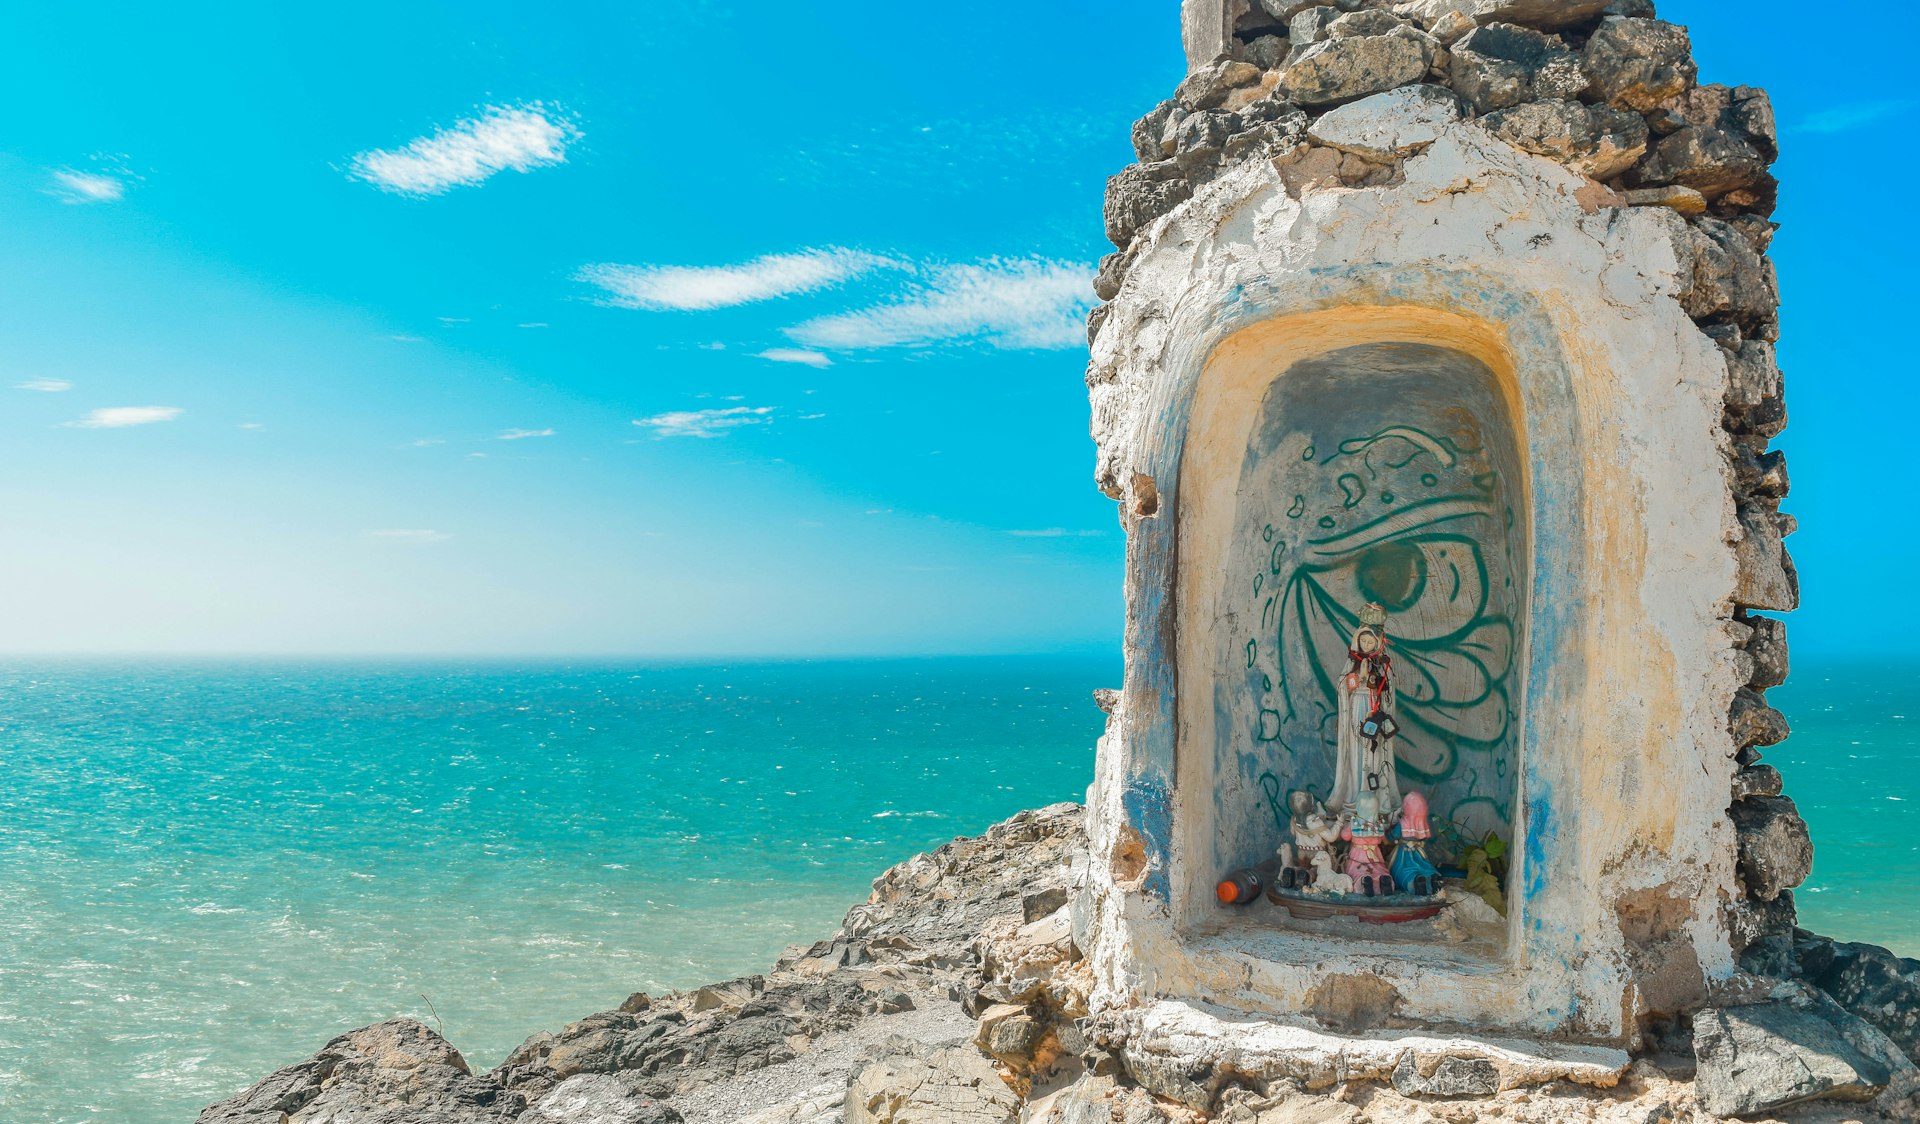 A small alter containing religious figures has been created out of rocks and stands at a viewpoint overlooking the dazzling azure Caribbean Sea.